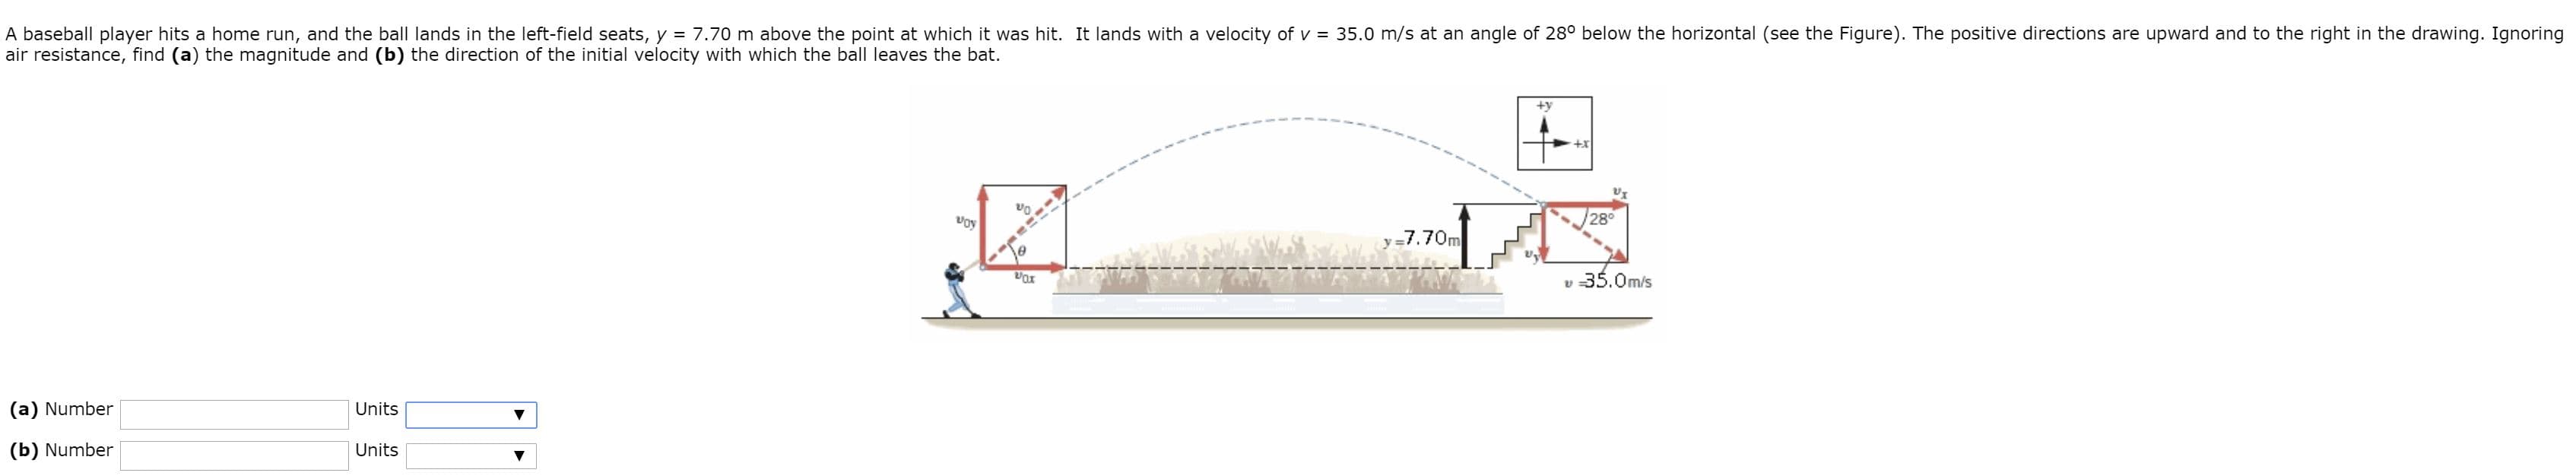 A baseball player hits a home run, and the ball lands in the left-field seats, y = 7.70 m above the point at which it was hit. It lands with a velocity of v = 35.0 m/s at an angle of 28° below the horizontal (see the Figure). The positive directions are upward and to the right in the drawing. Ignorin
air resistance, find (a) the magnitude and (b) the direction of the initial velocity with which the ball leaves the bat.
+y
voy
28°
y=7.70m
VOI
v 35.0m/s
